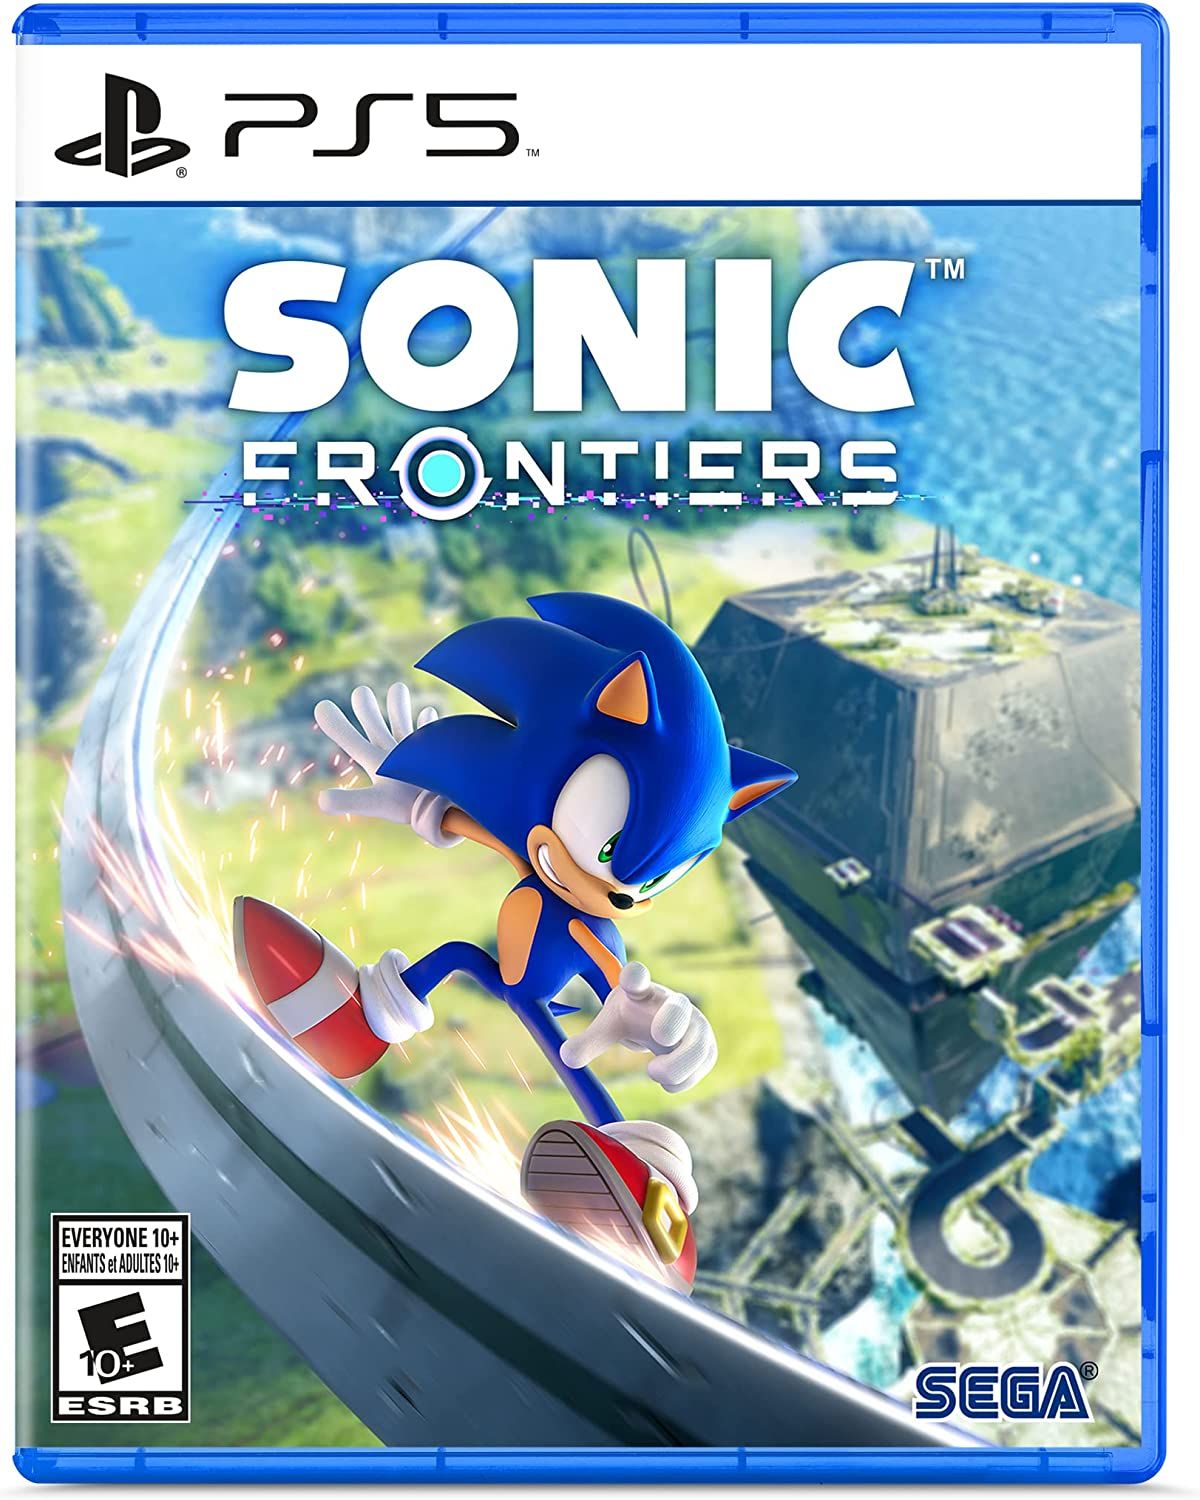 Sonic Frontiers cover with Sonic the Hedgehog surfing on a metal rim